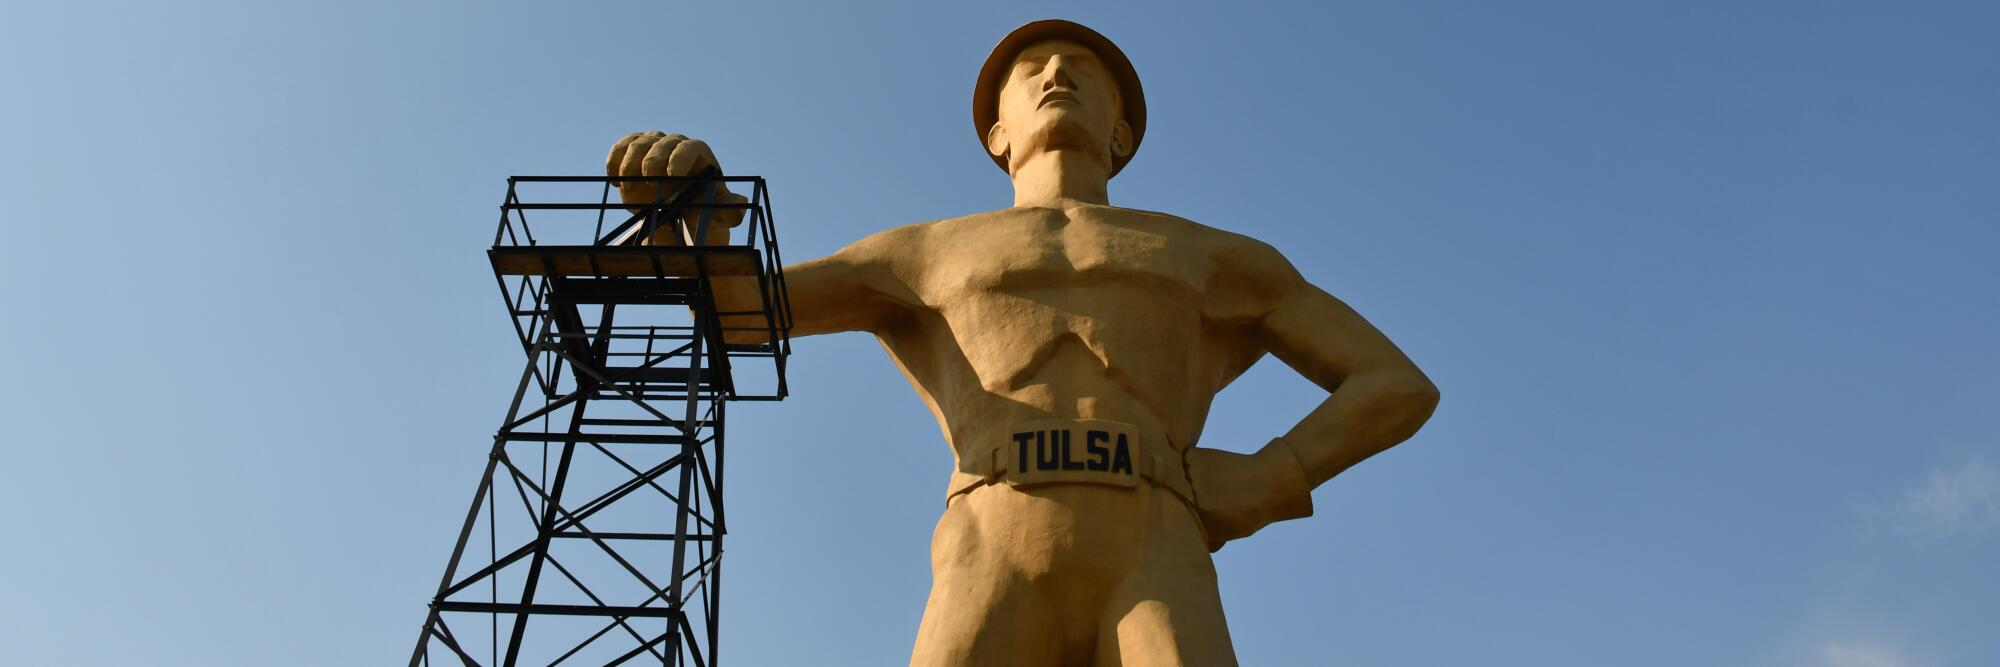 Statue of "Golden Driller," Tulsa, showing a muscular oil worker with one hand on an oil derrick.